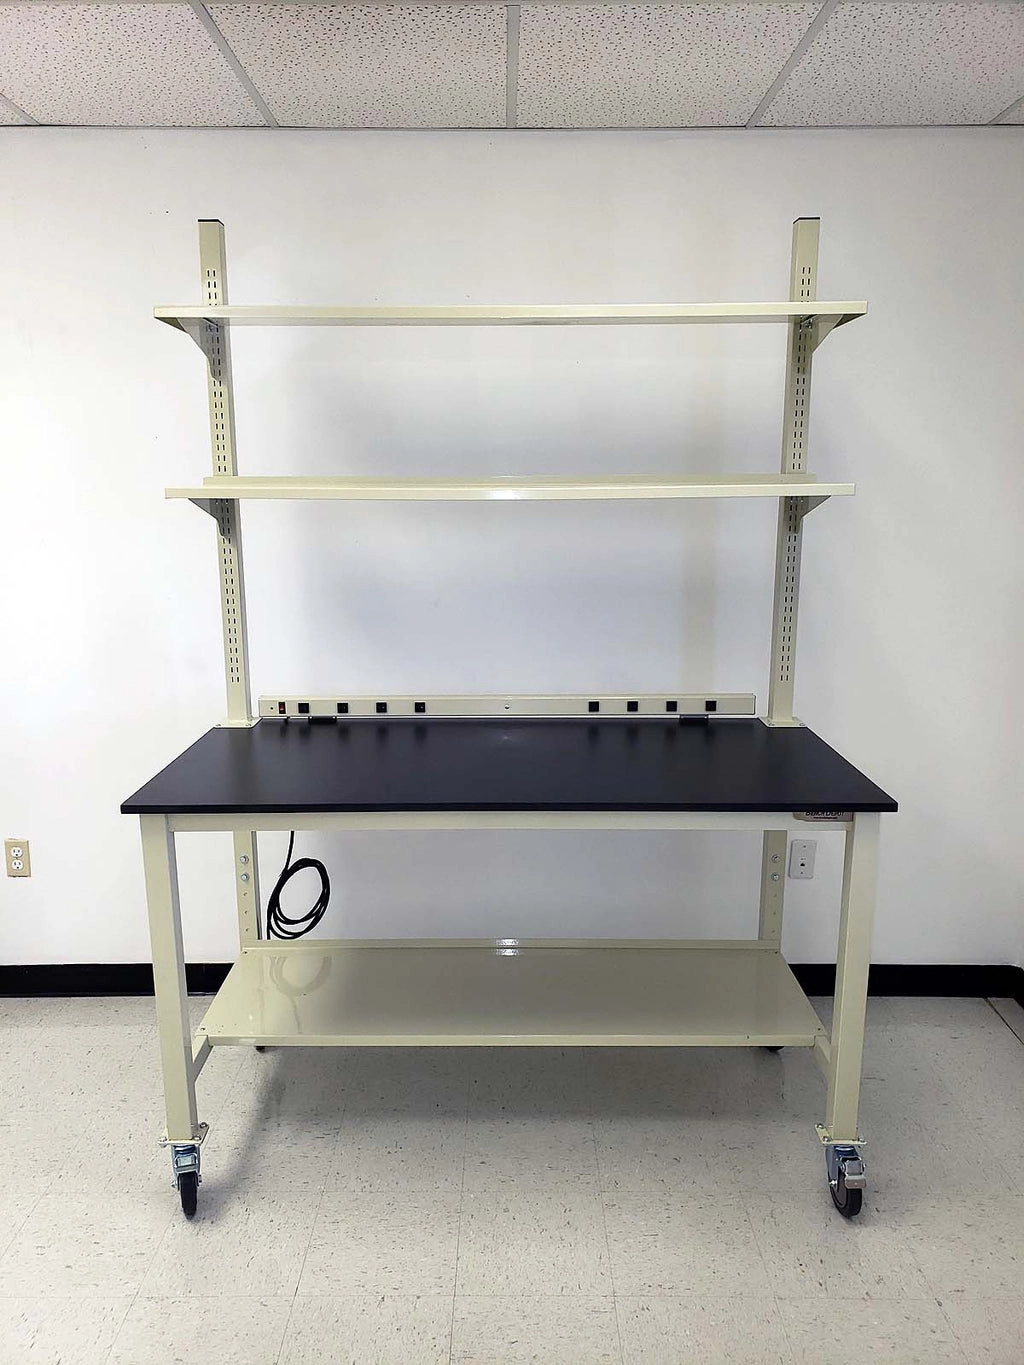 Quick Labs 5 foot heavy duty mobile lab bench with plastic laminate countertop, (2) upper shelves, undercounter shelf, power strip, and casters - adjustable height | QMBH3060-PL